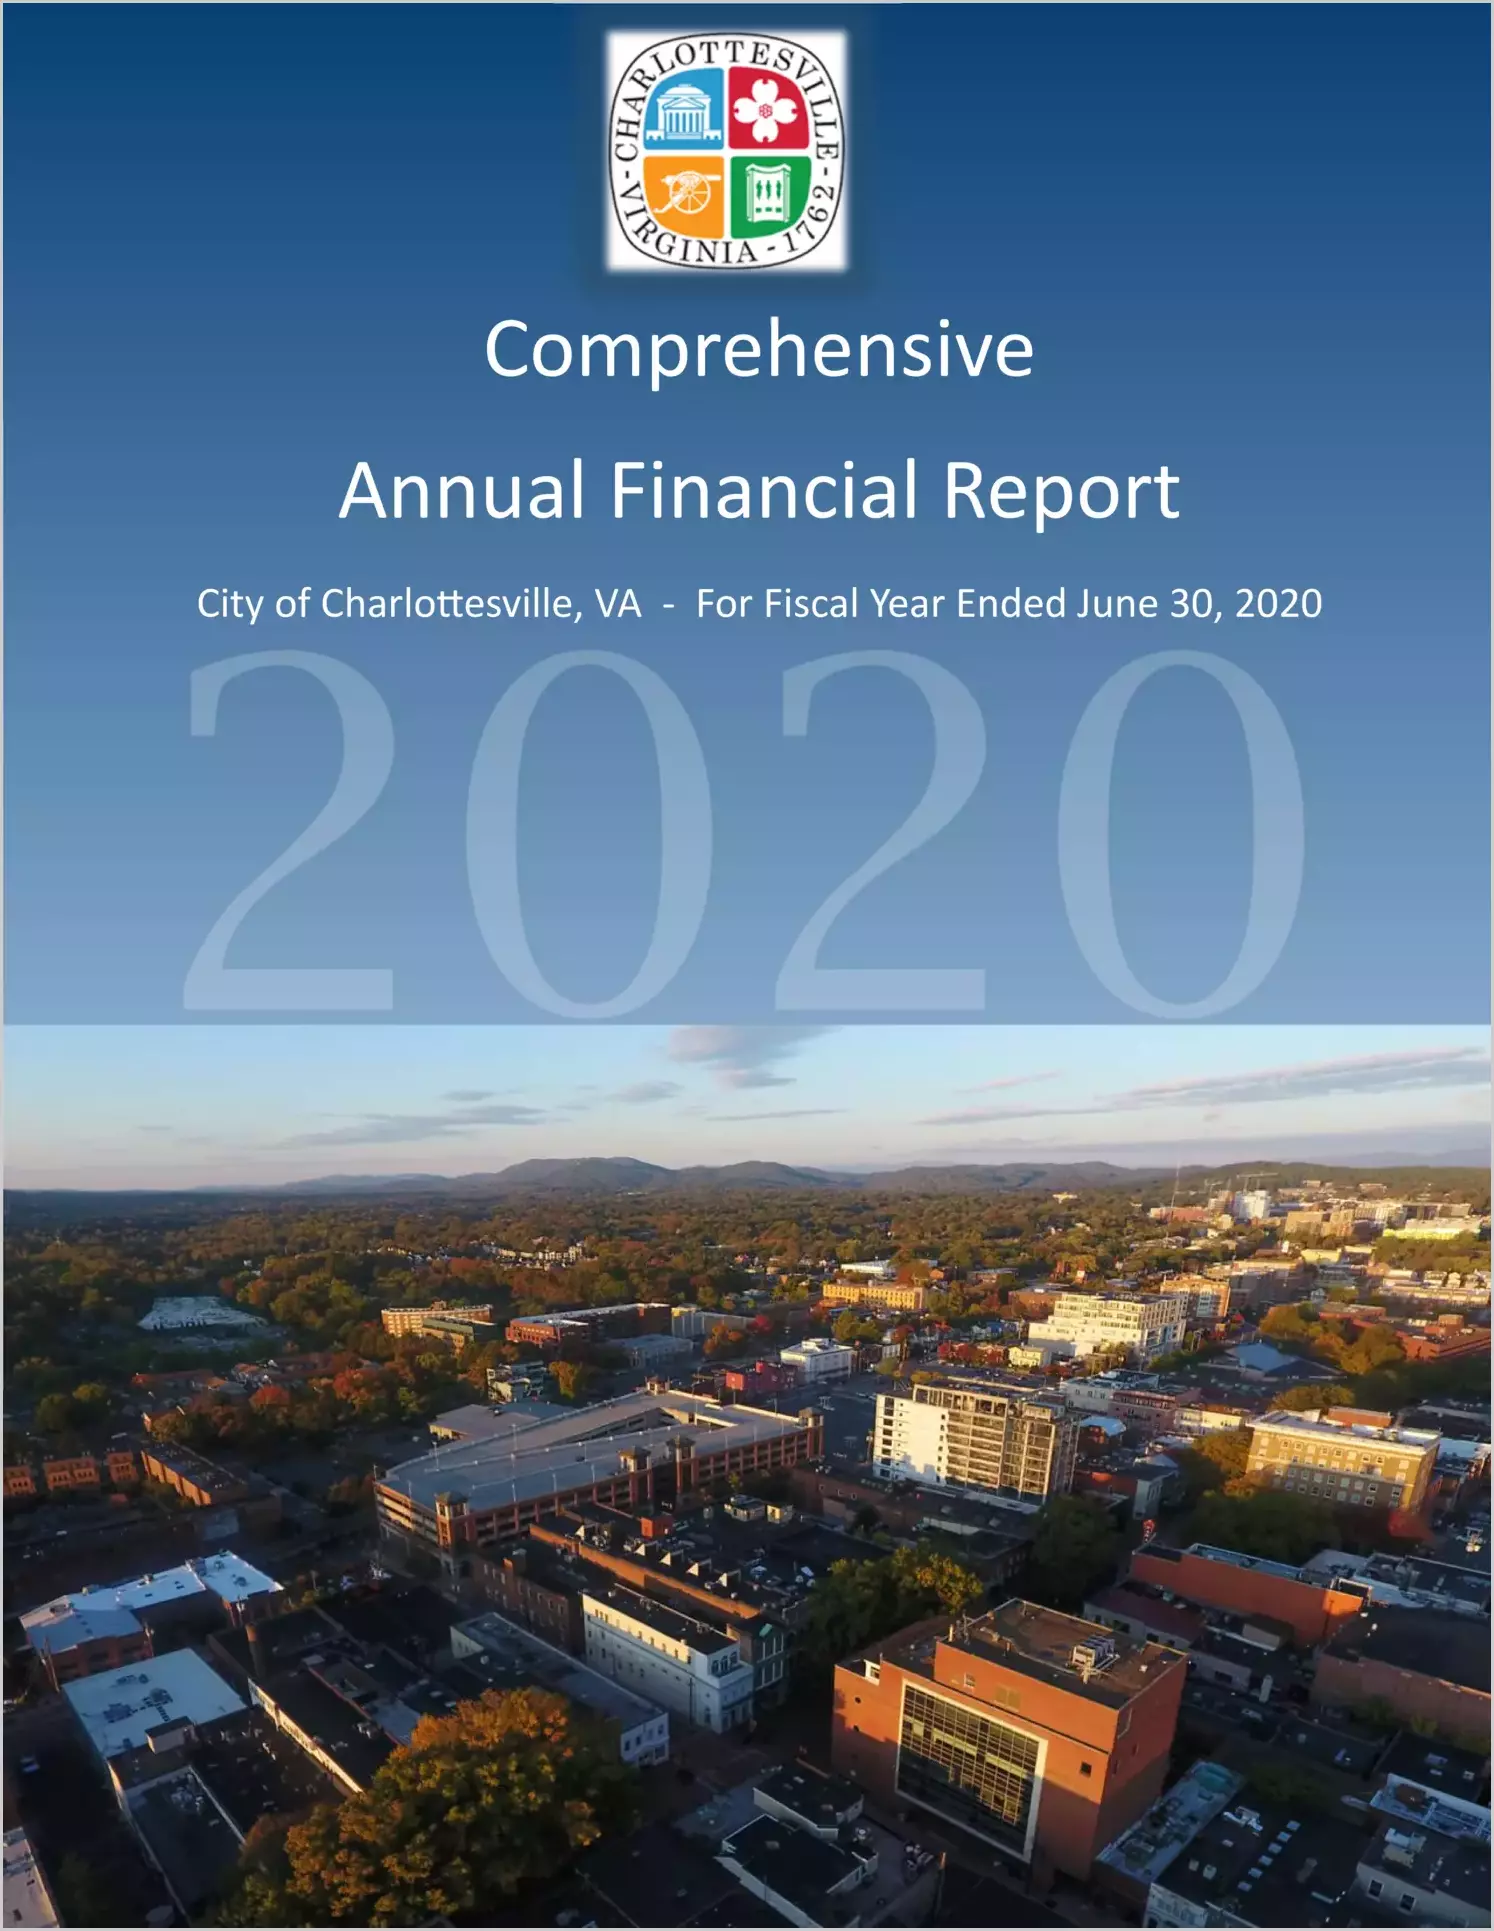 2020 Annual Financial Report for City of Charlottesville